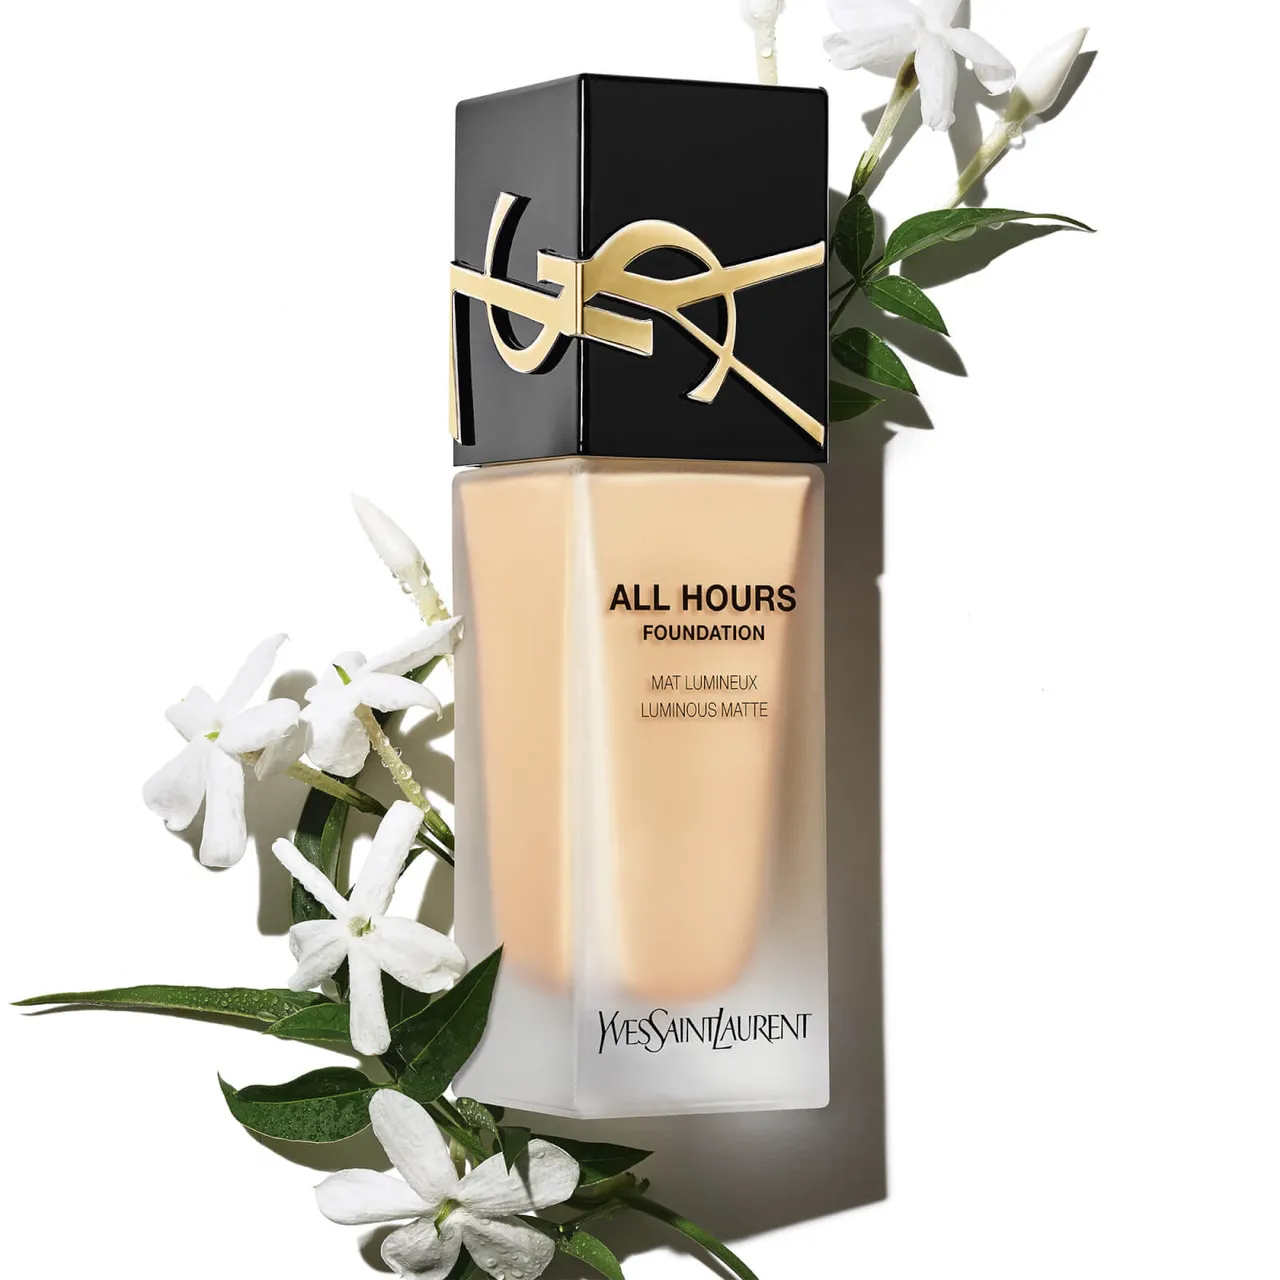 Yves Saint Laurent All Hours Luminous Matte Foundation with SPF 39 25ml (Various Shades) - LN8